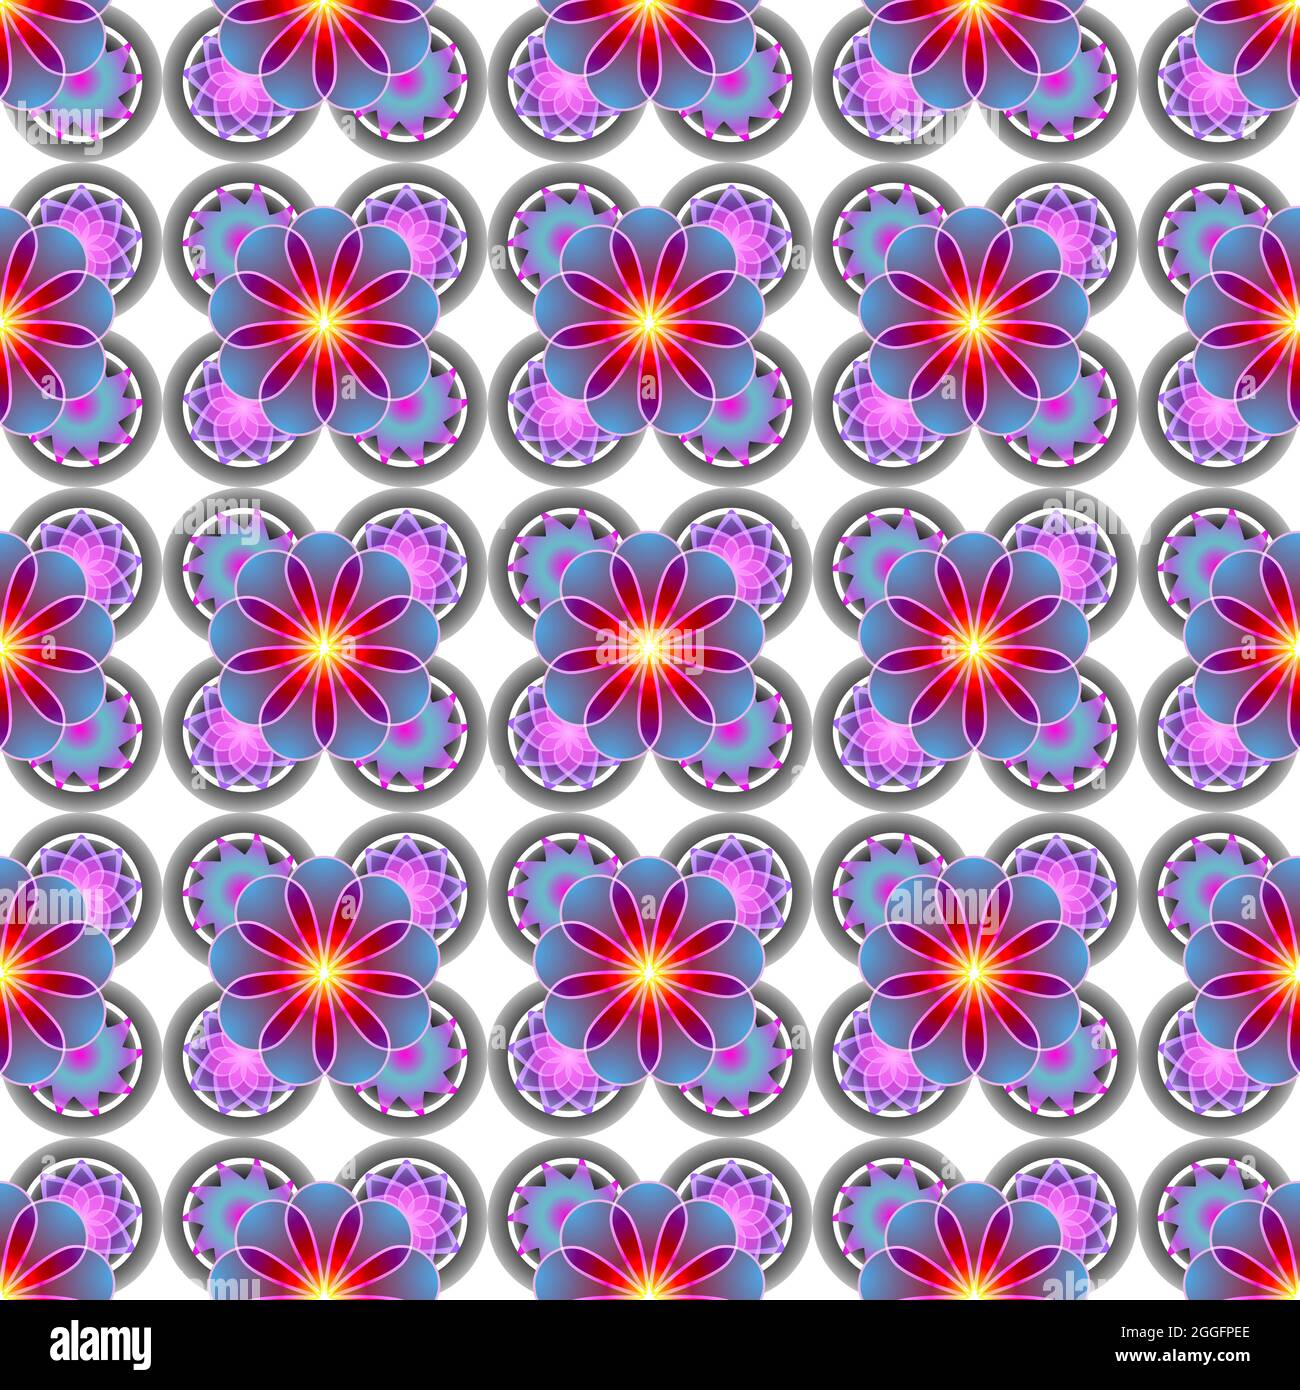 Brightly colored graphic flower pattern seamless design Stock Photo